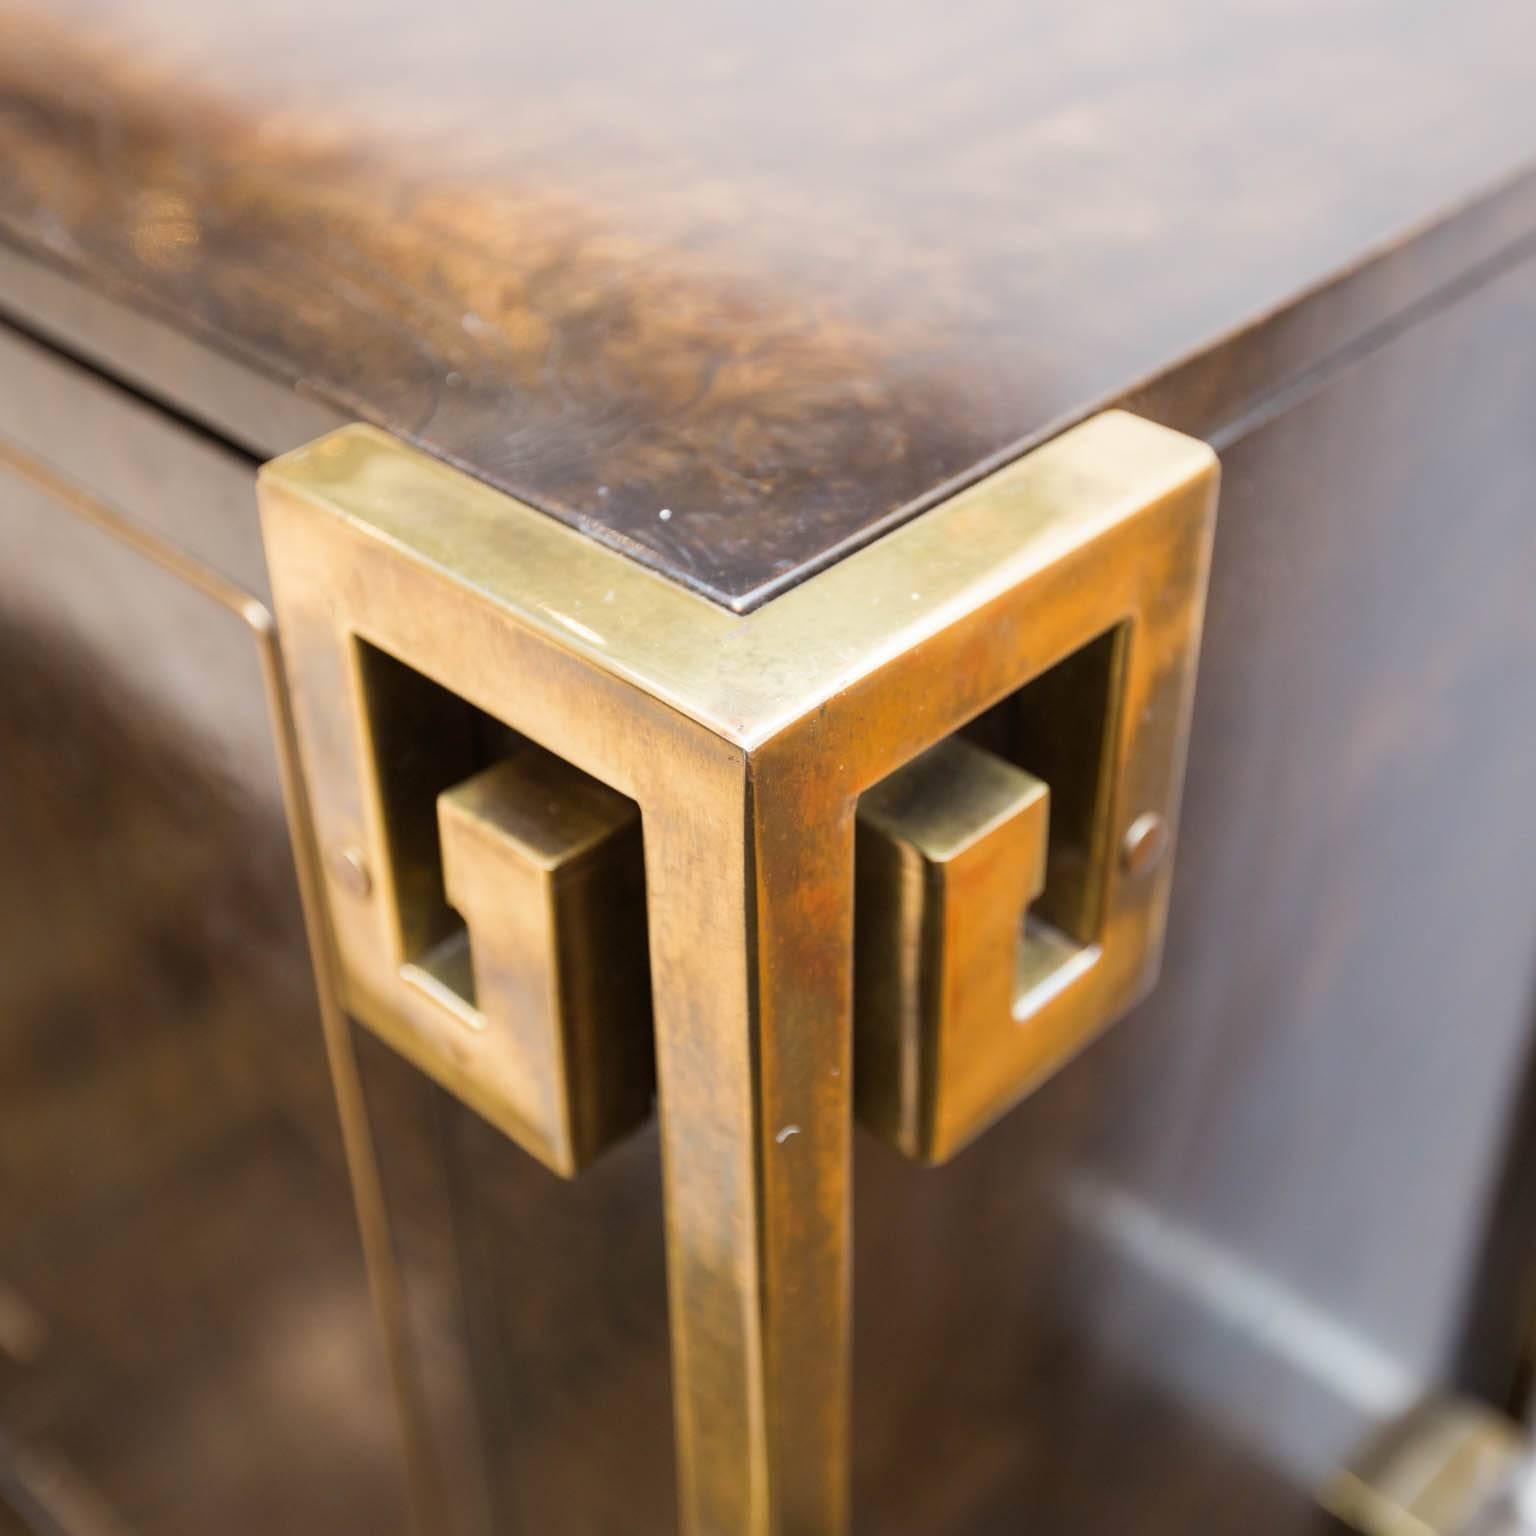 Dramatic Greek-key themed design by Rohne for Mastercraft. Beautiful burled walnut veneers and brass hardware and trim make this a great anchor piece for any room.